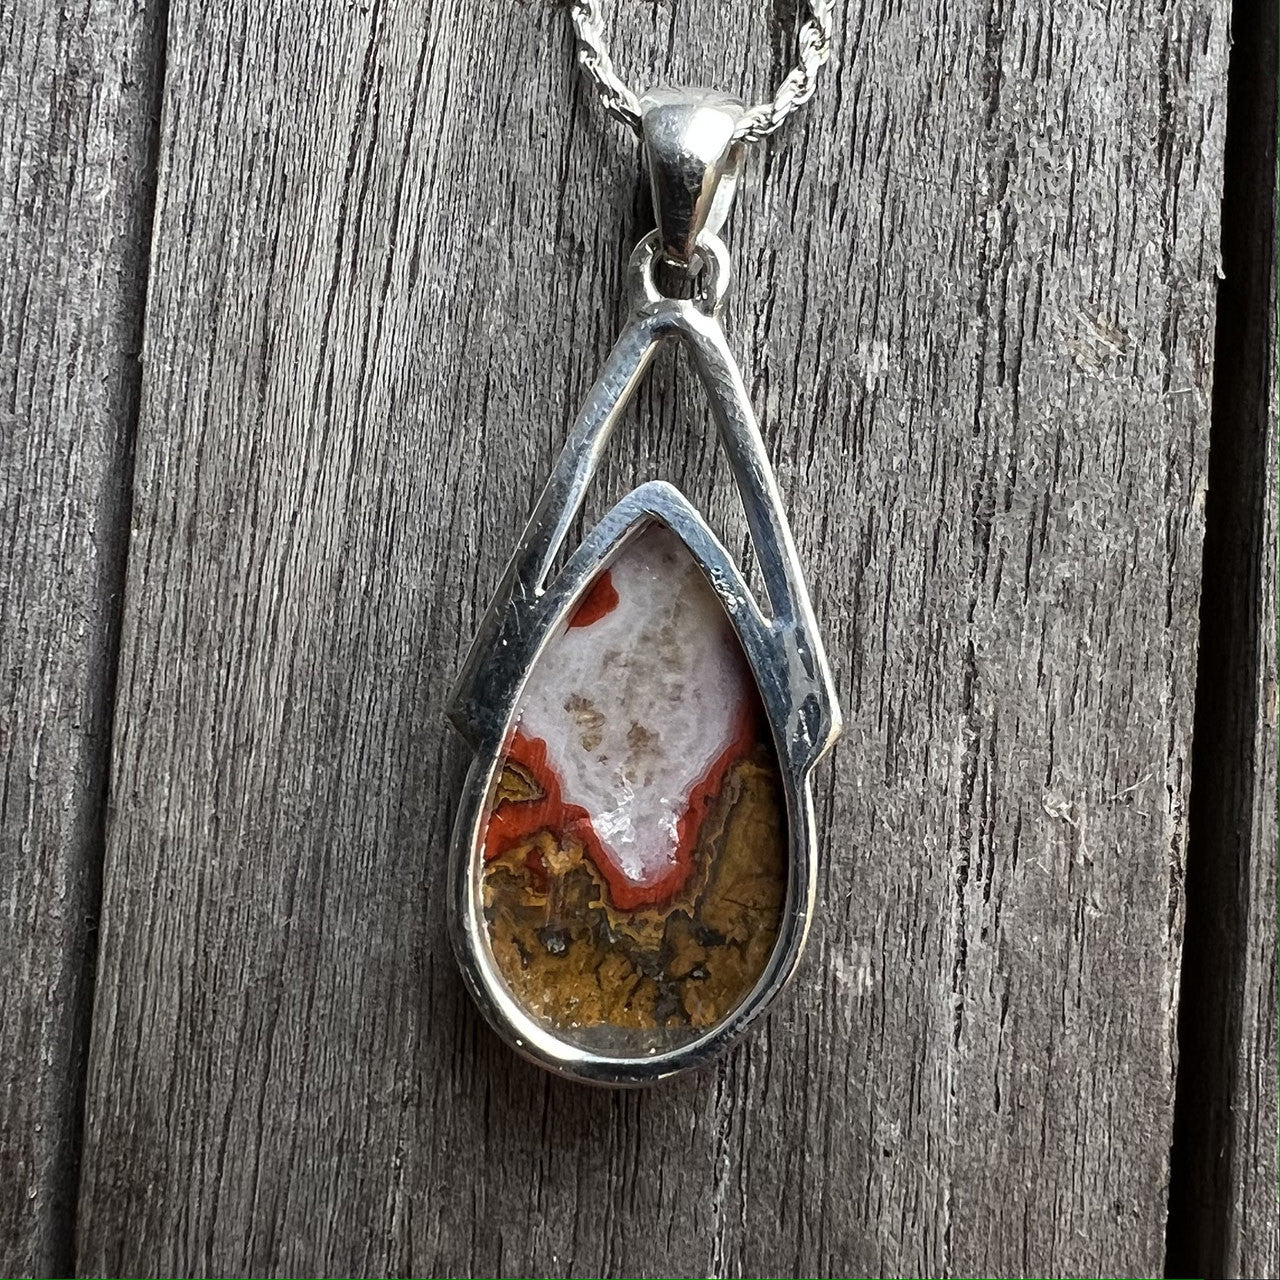 A strong powerful stone that will help to bring dreams into reality while releasing old patterns that are not for our highest good. This stone will help reveal what one needs to stay balanced and protected from all negativity and together they surround you with peaceful vibrations allowing you to manifest your hearts desire.